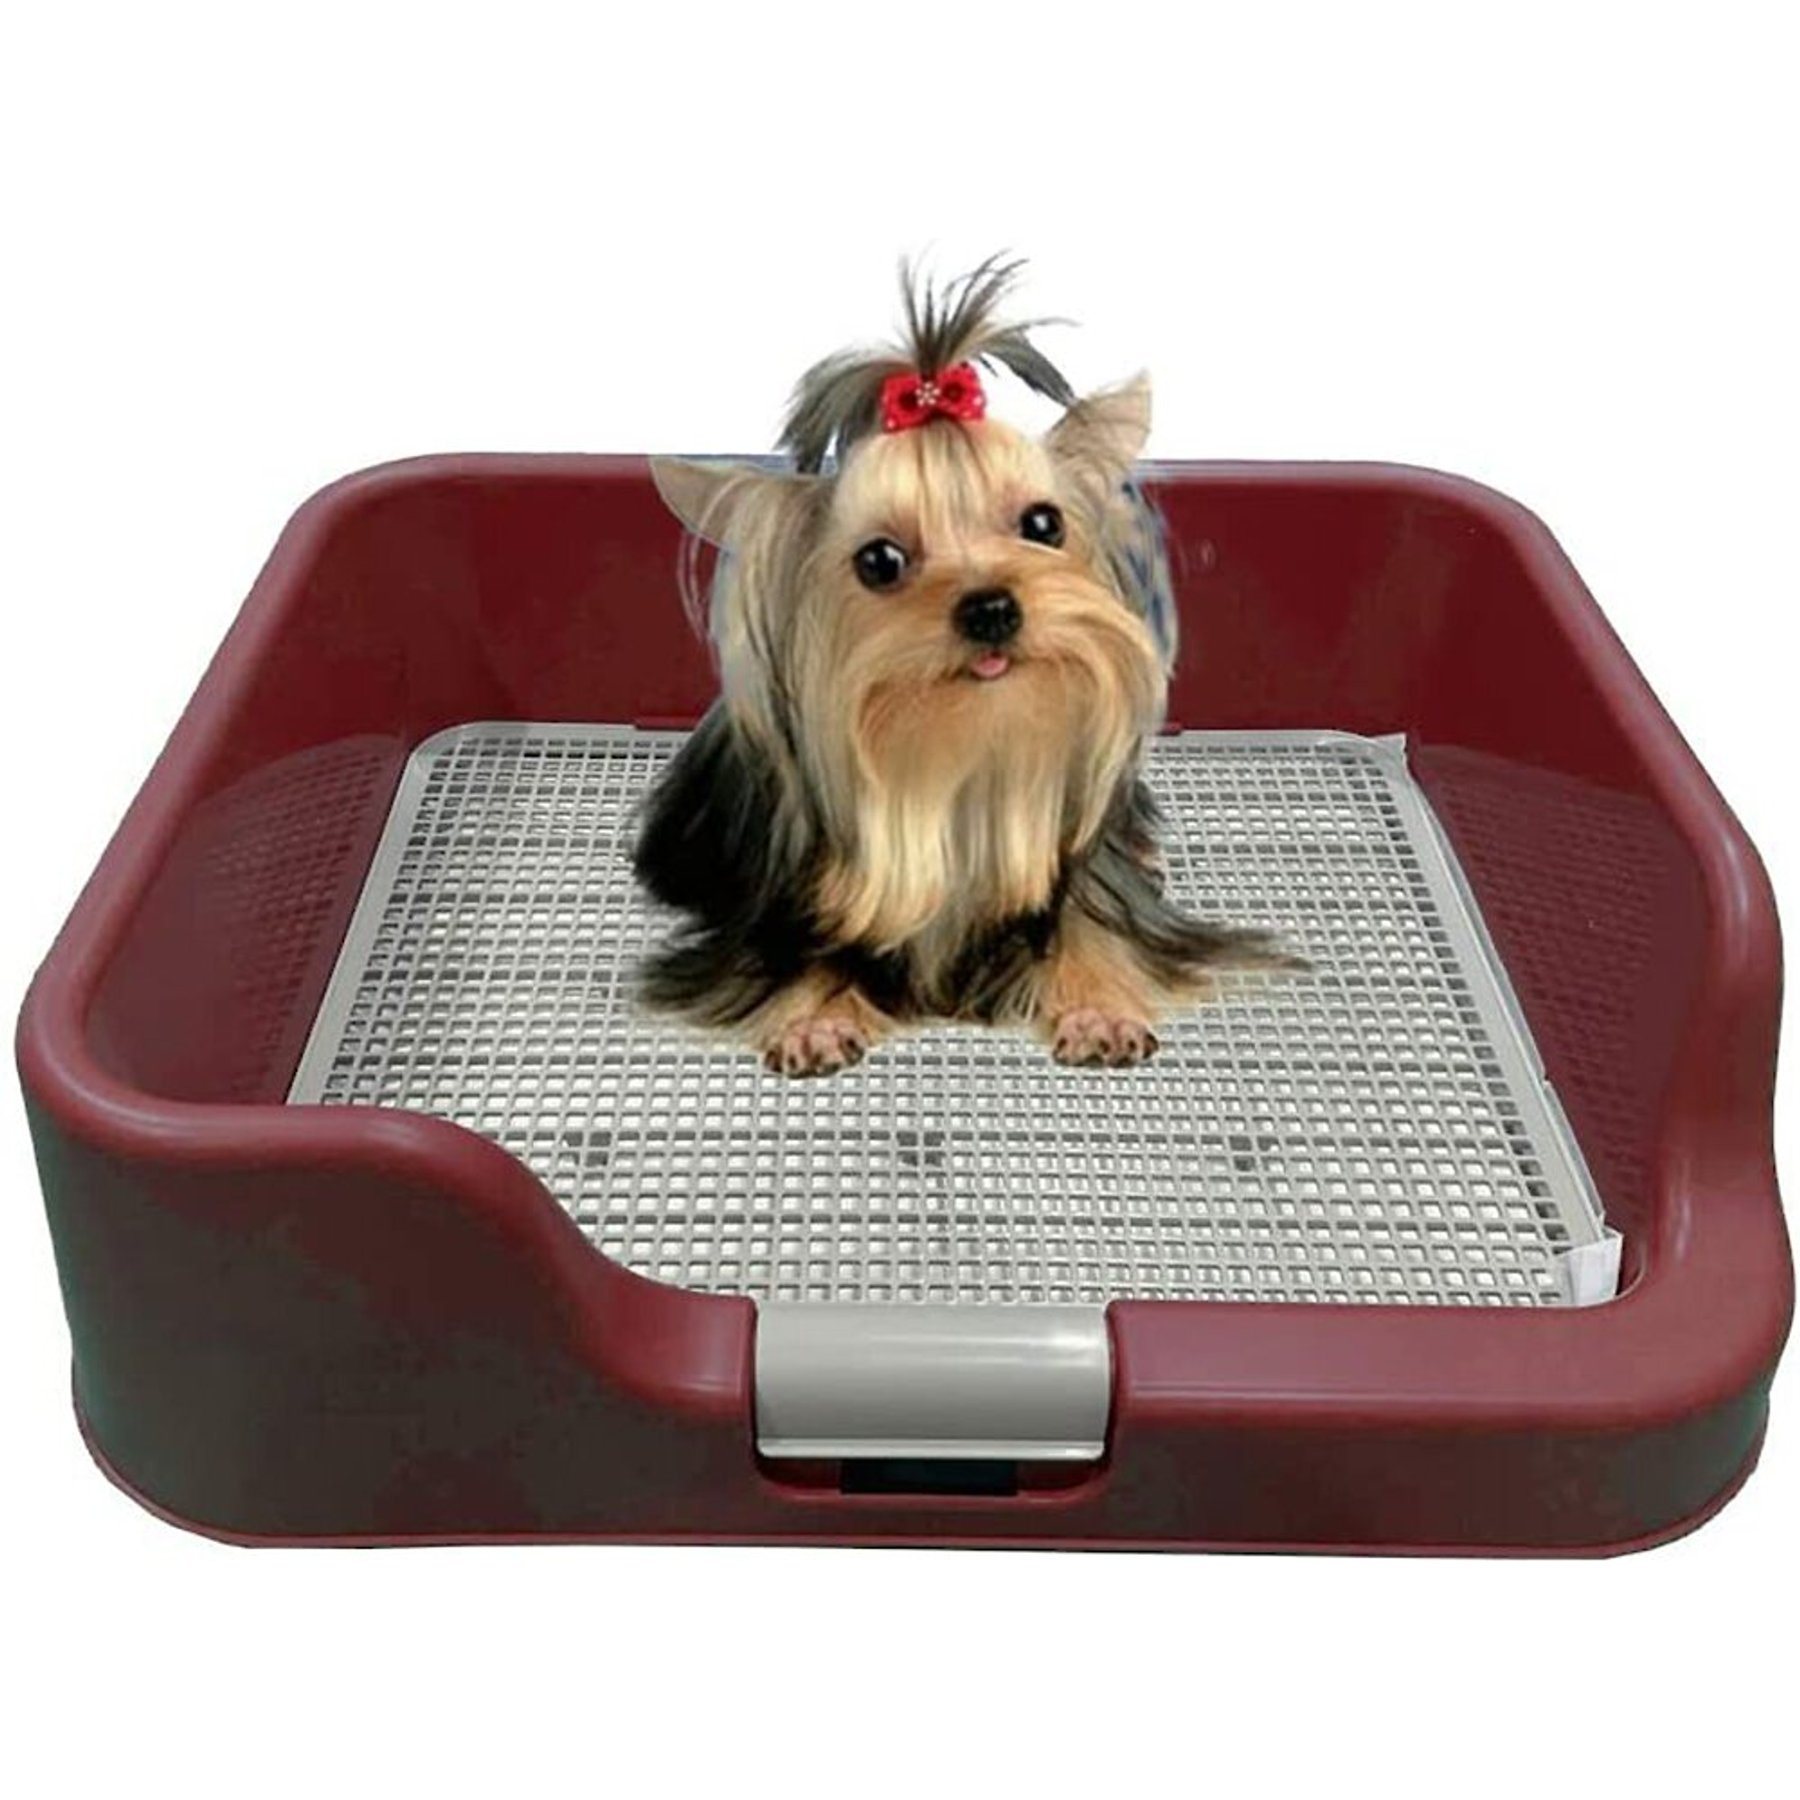  Pee Pad Holder for Small Dogs Indoor Potty Training Tray for  Little Puppy or Cat Litter Mat Only(Very Small) : Pet Supplies